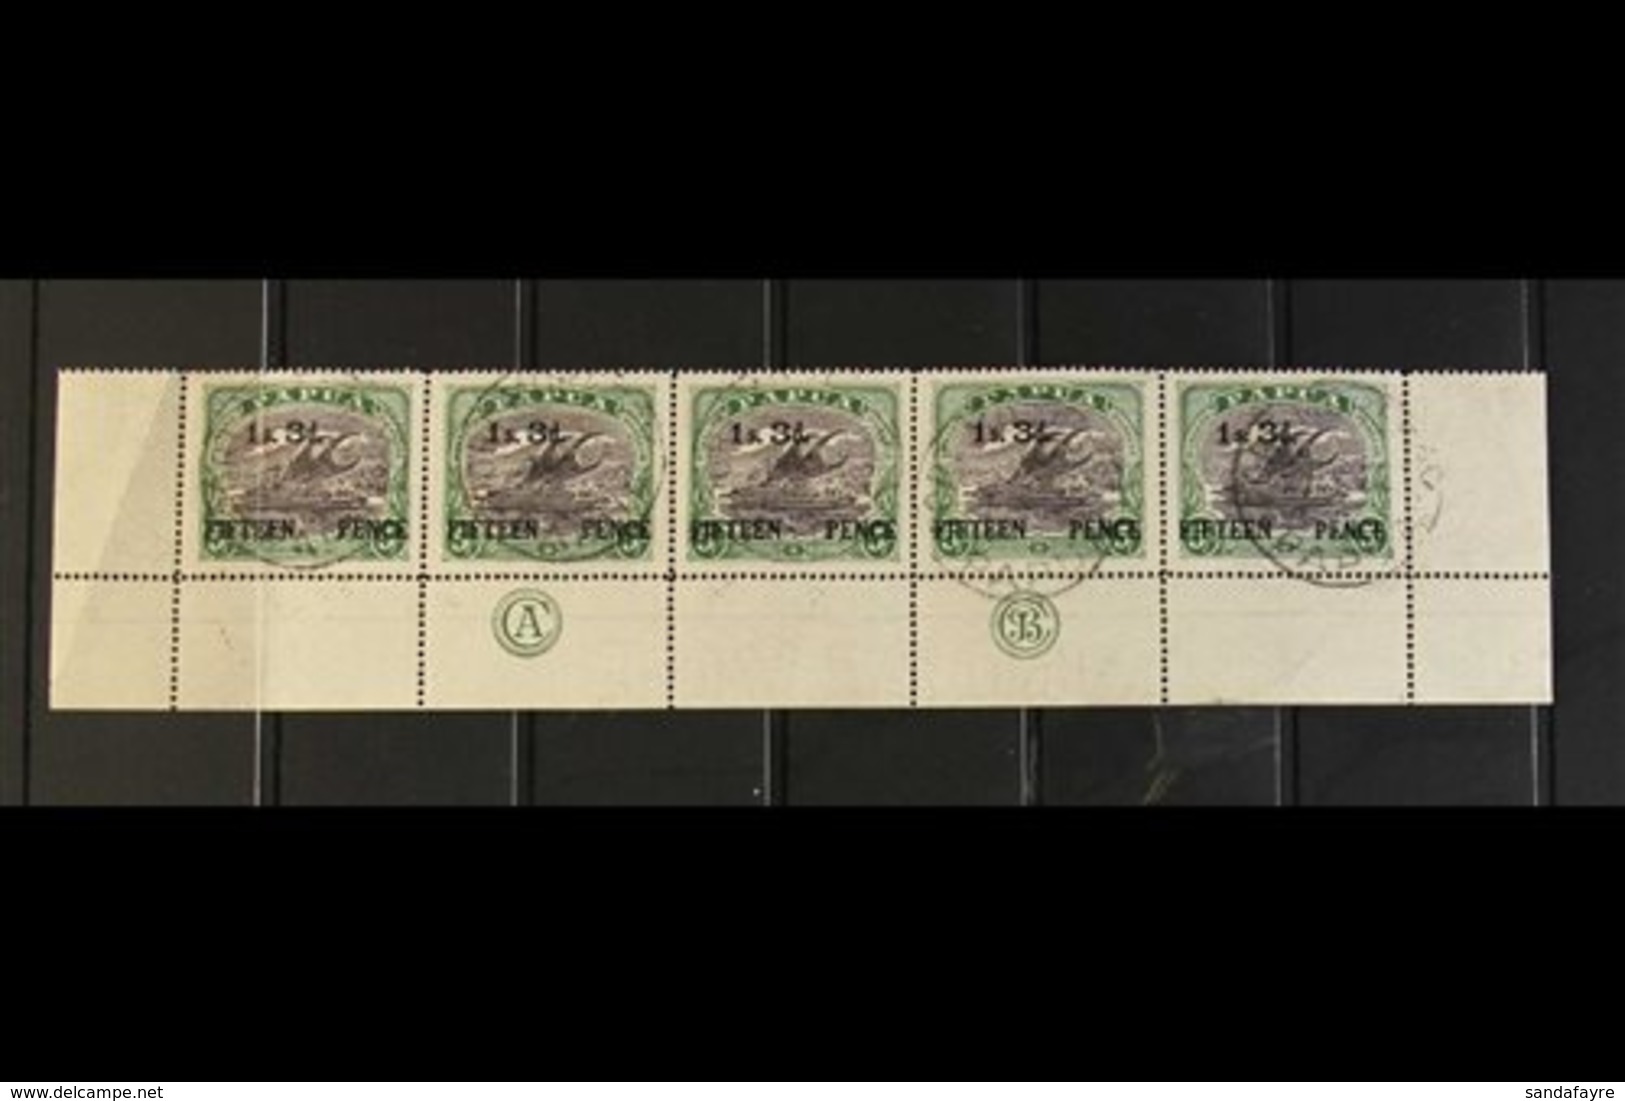 1931 1s3d On 5s Black And Deep Green, SG 123, Complete Lower Row Of The Sheet Showing JBC Imprint, Fine Port Moresby Cds - Papua New Guinea